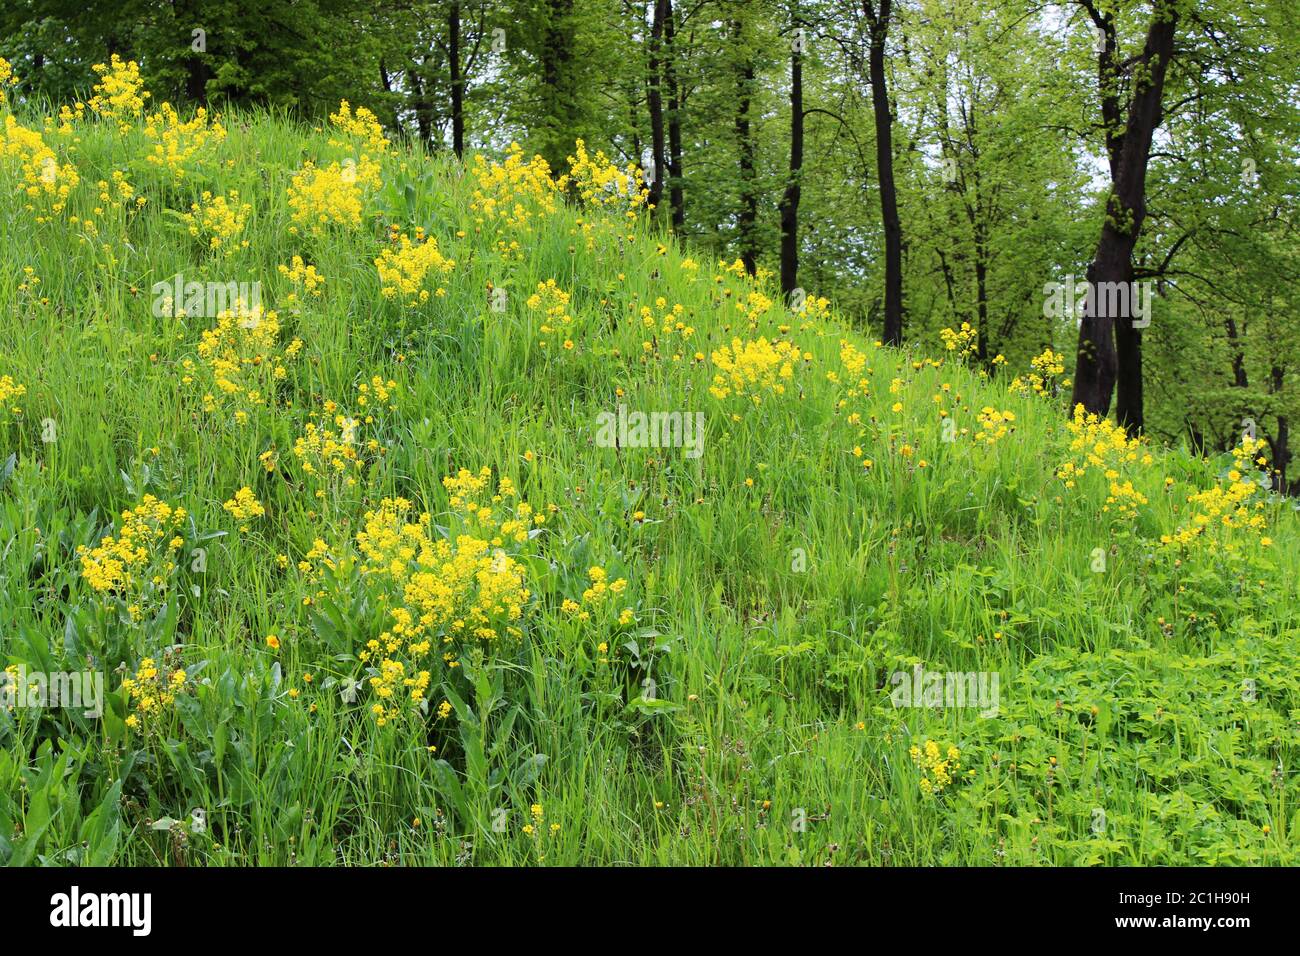 The growth of a yellow rape flower Brassica napus on an abandoned piece of land near the park. Russia. Stock Photo